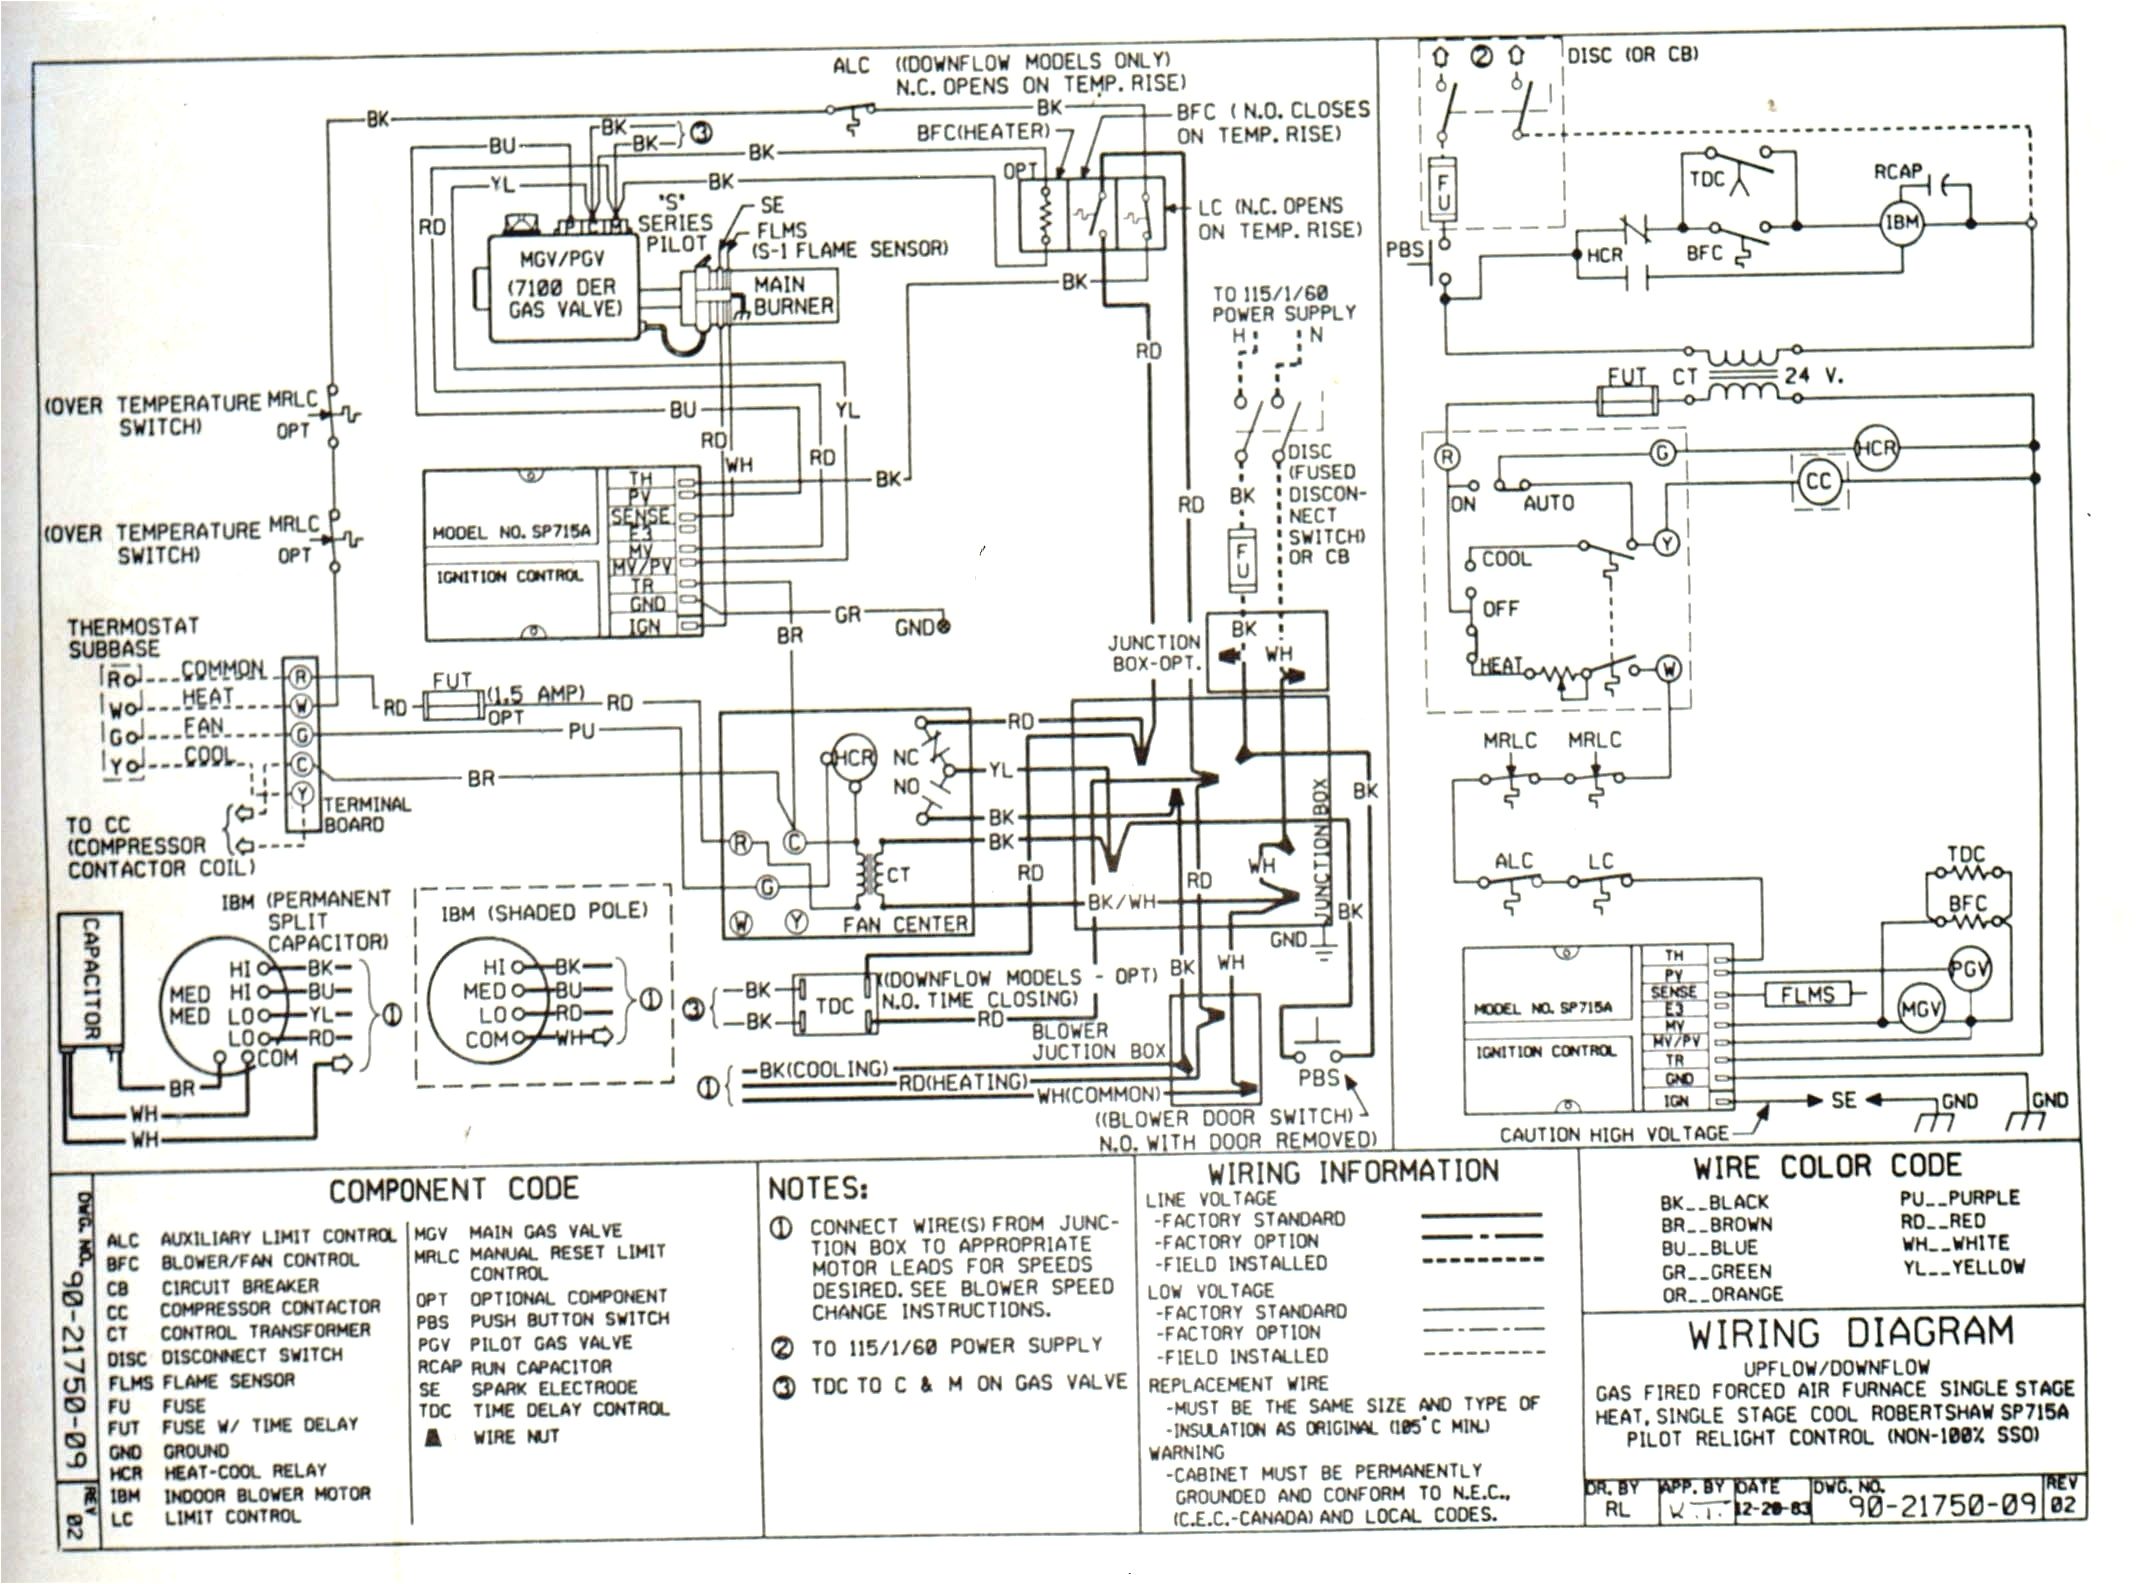 wiring schematic for thermostat wiring diagram database dx cooling and heating hot water on wiring rheem water heater